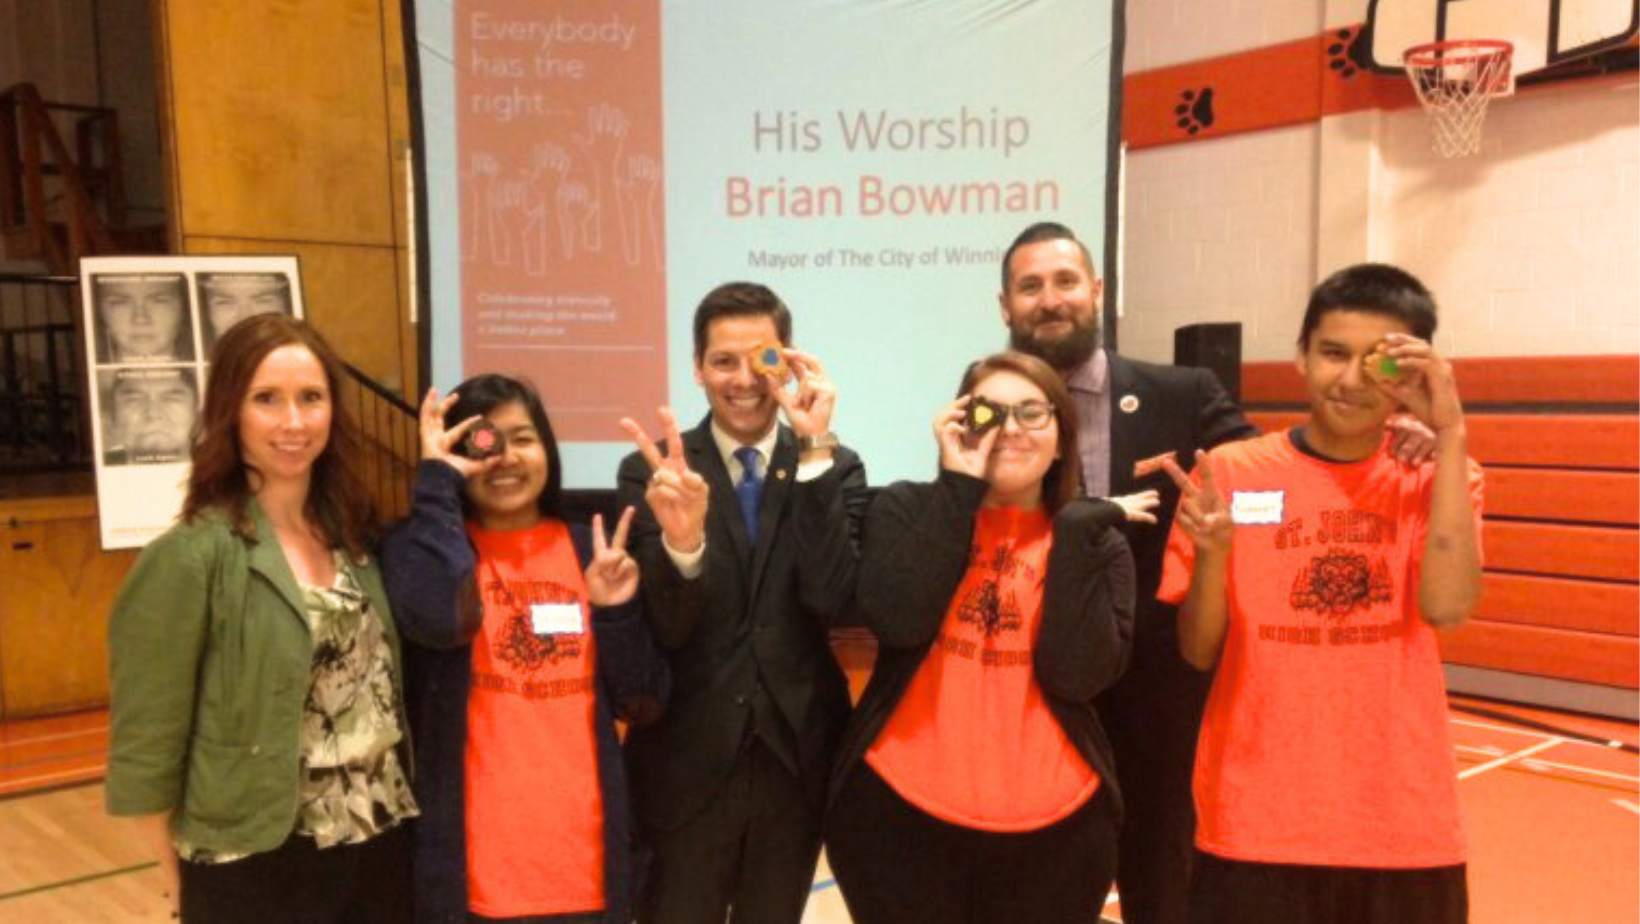 6 people stand in a school gym in front of a projector screen that shows the message His Worship Brian Bowman. The people standing in front are guidance counsellor Robin Wilson, Mayor Brian Bowman, Vice Principal Cree Crowchild, and 3 St Johns’ High School students wearing matching orange t-shirts. The students and the mayor are each holding up a piece of the empathy toy to cover one eye, making a peace sign with their other hand, and smiling.